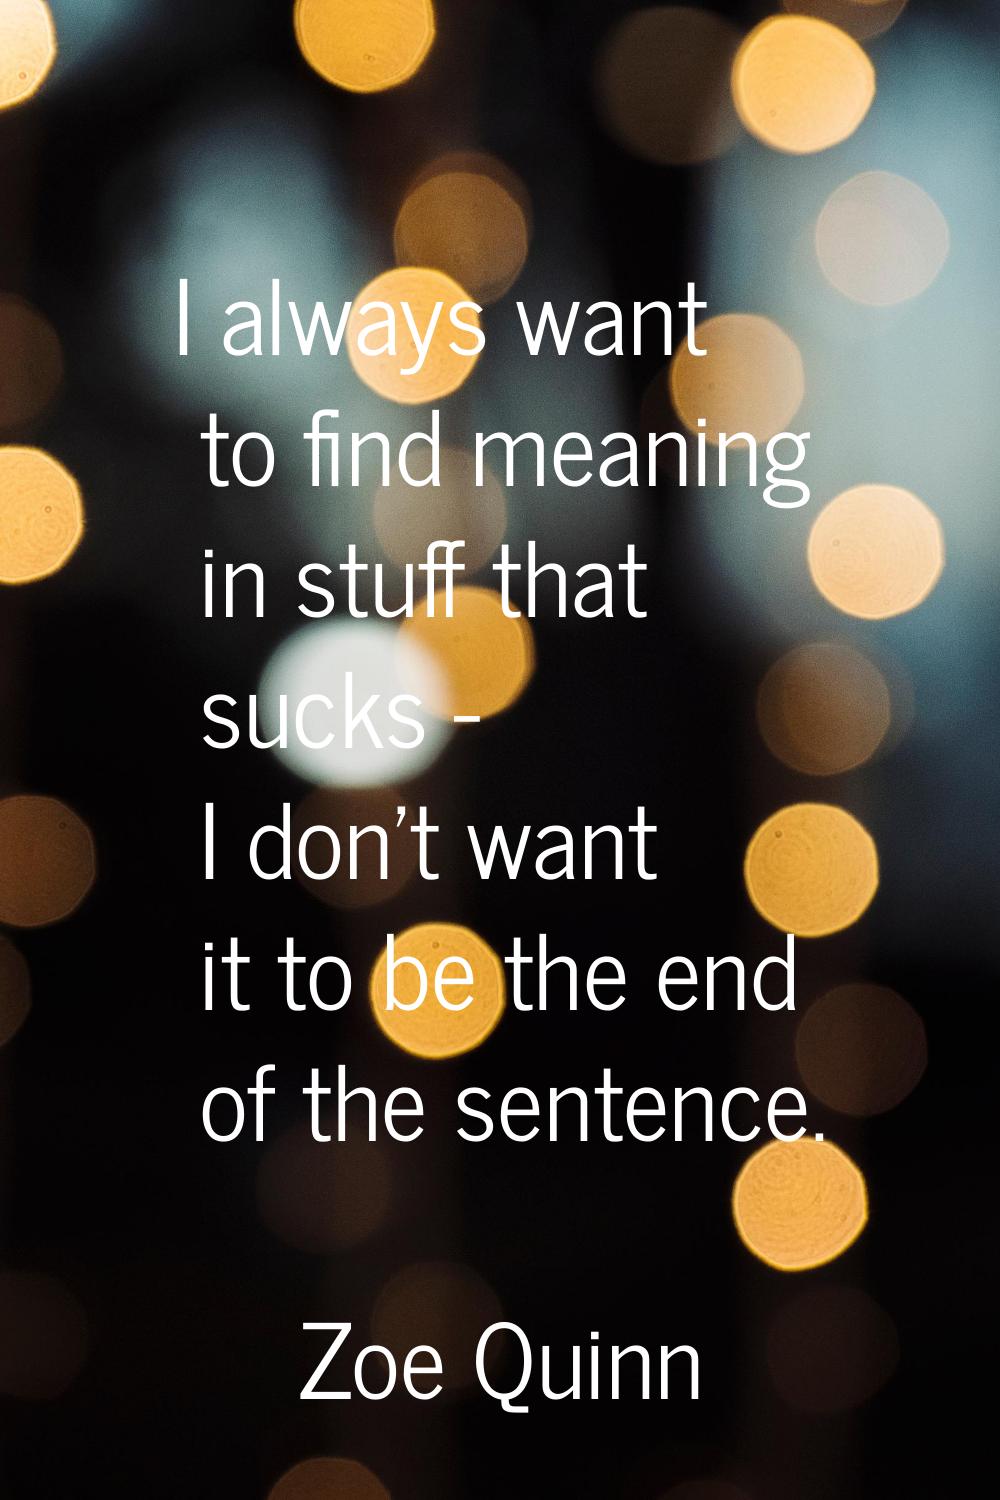 I always want to find meaning in stuff that sucks - I don't want it to be the end of the sentence.